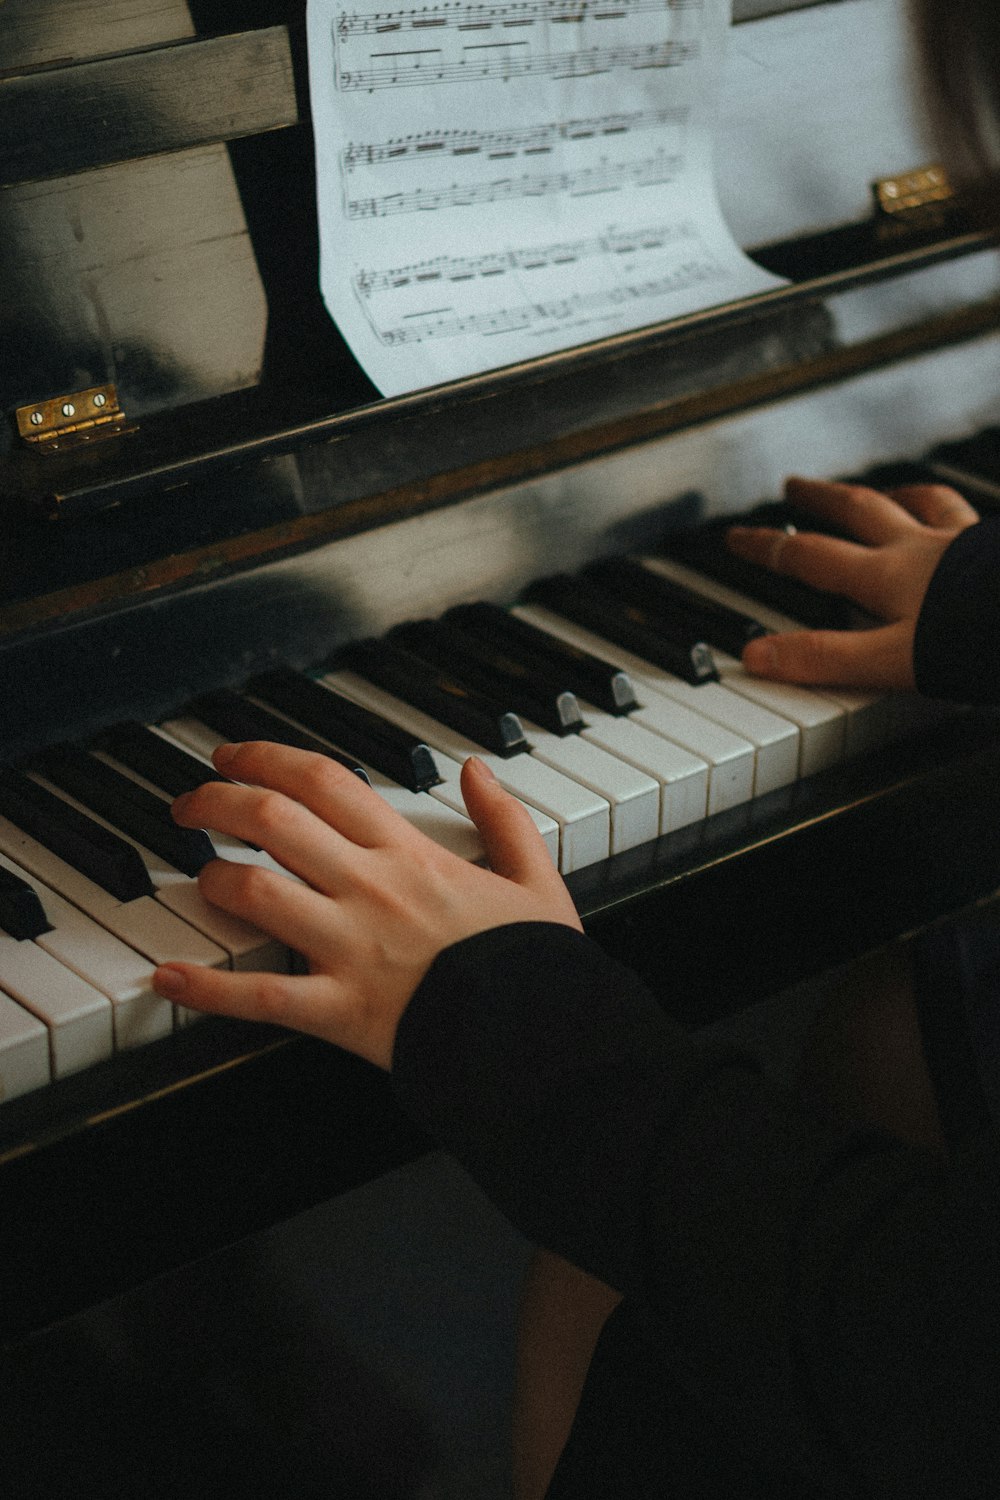 Hands playing piano with a note photo – Free Ukraine Image on Unsplash